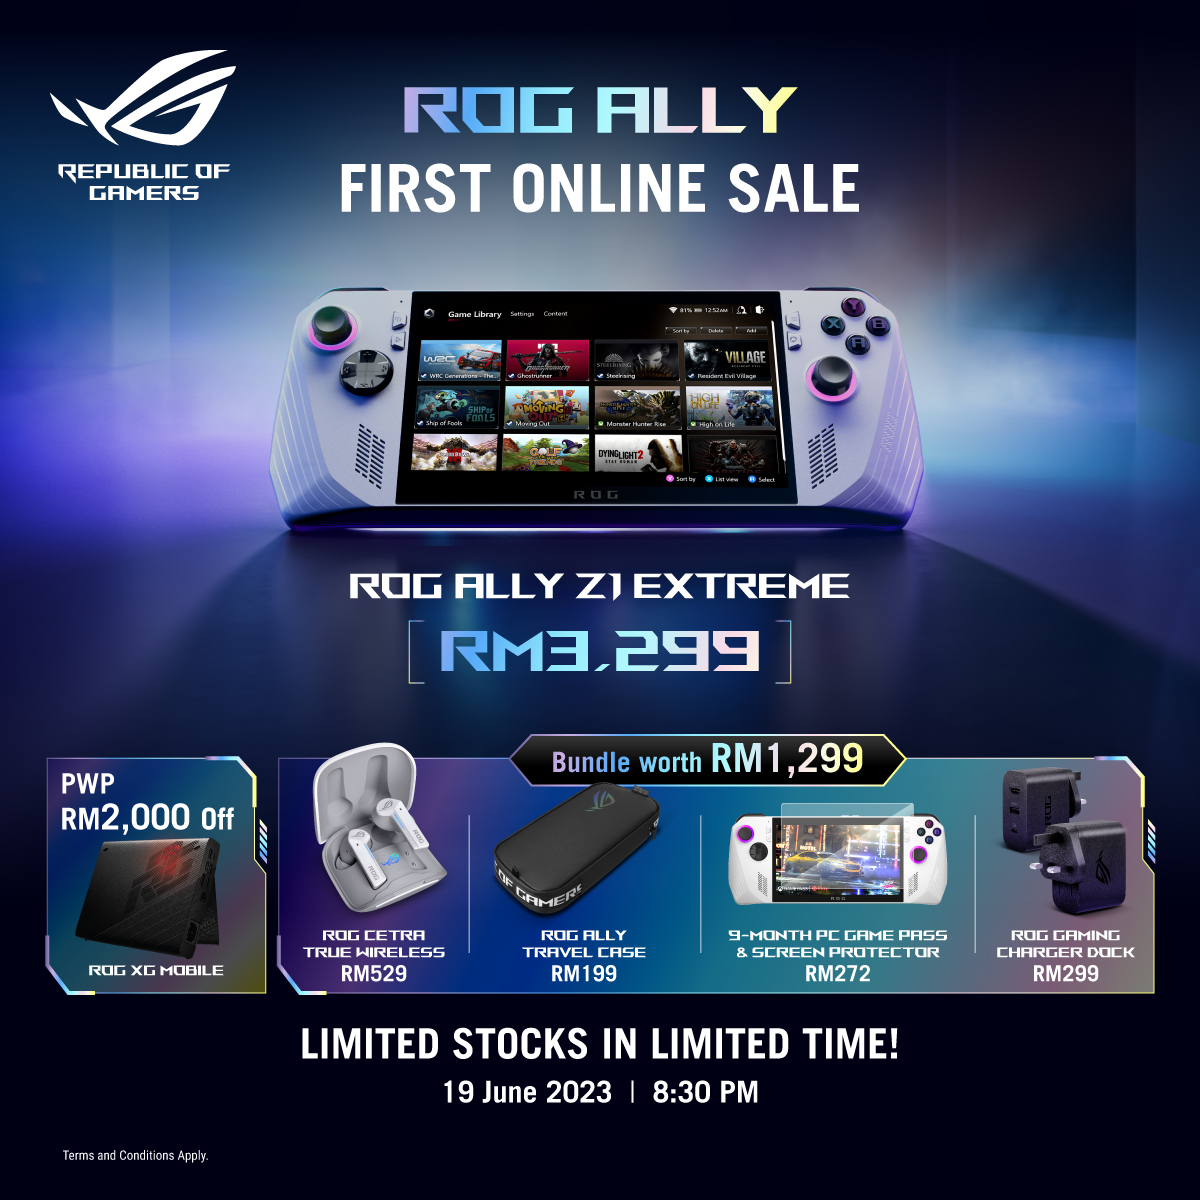 ROG ALLY Official Online sales starting on 19th June 8.30pm